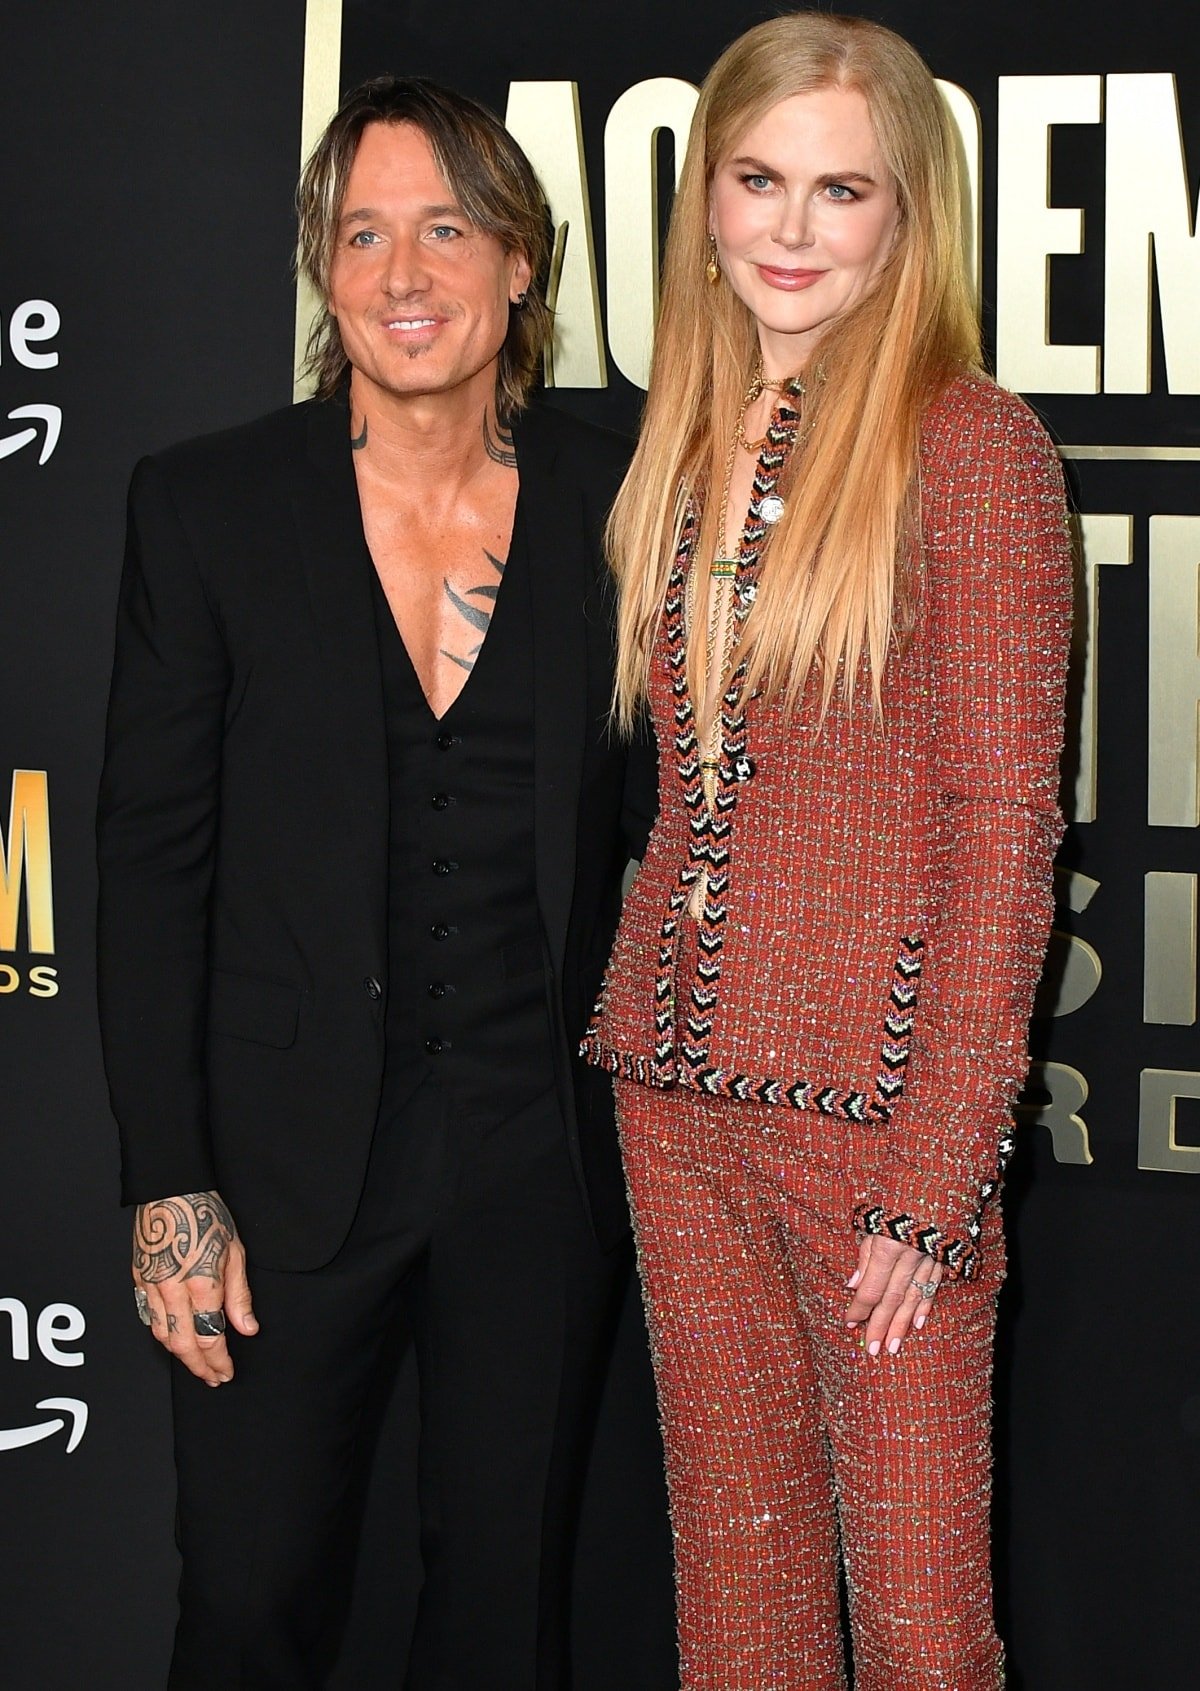 Keith Urban and Nicole Kidman attending the 58th Annual Academy of Country Music Awards